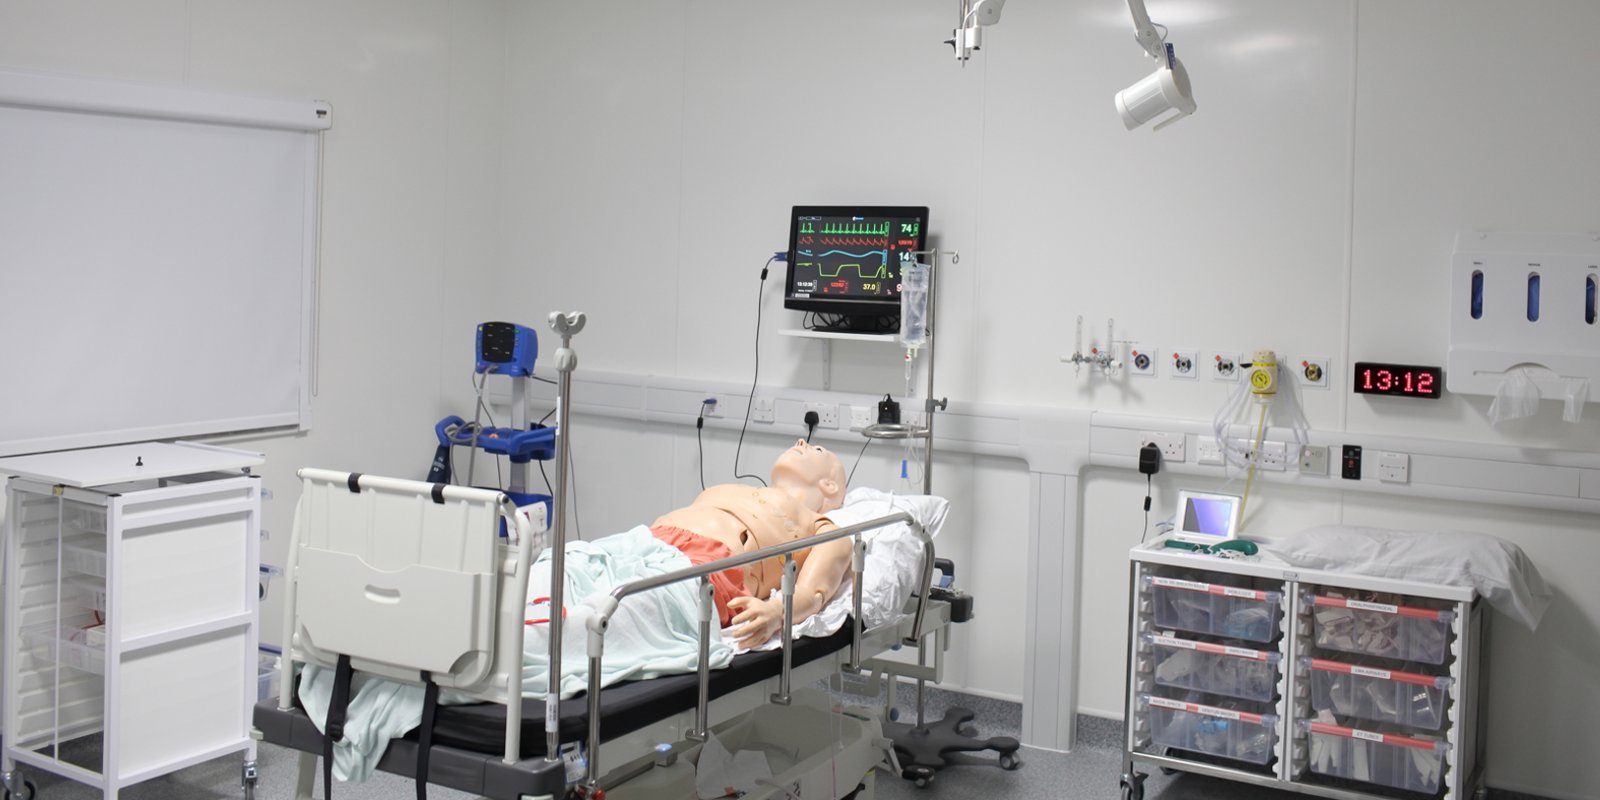 Use e-Simulation technology to learn Advanced Cardiac Life Support (ACLS)